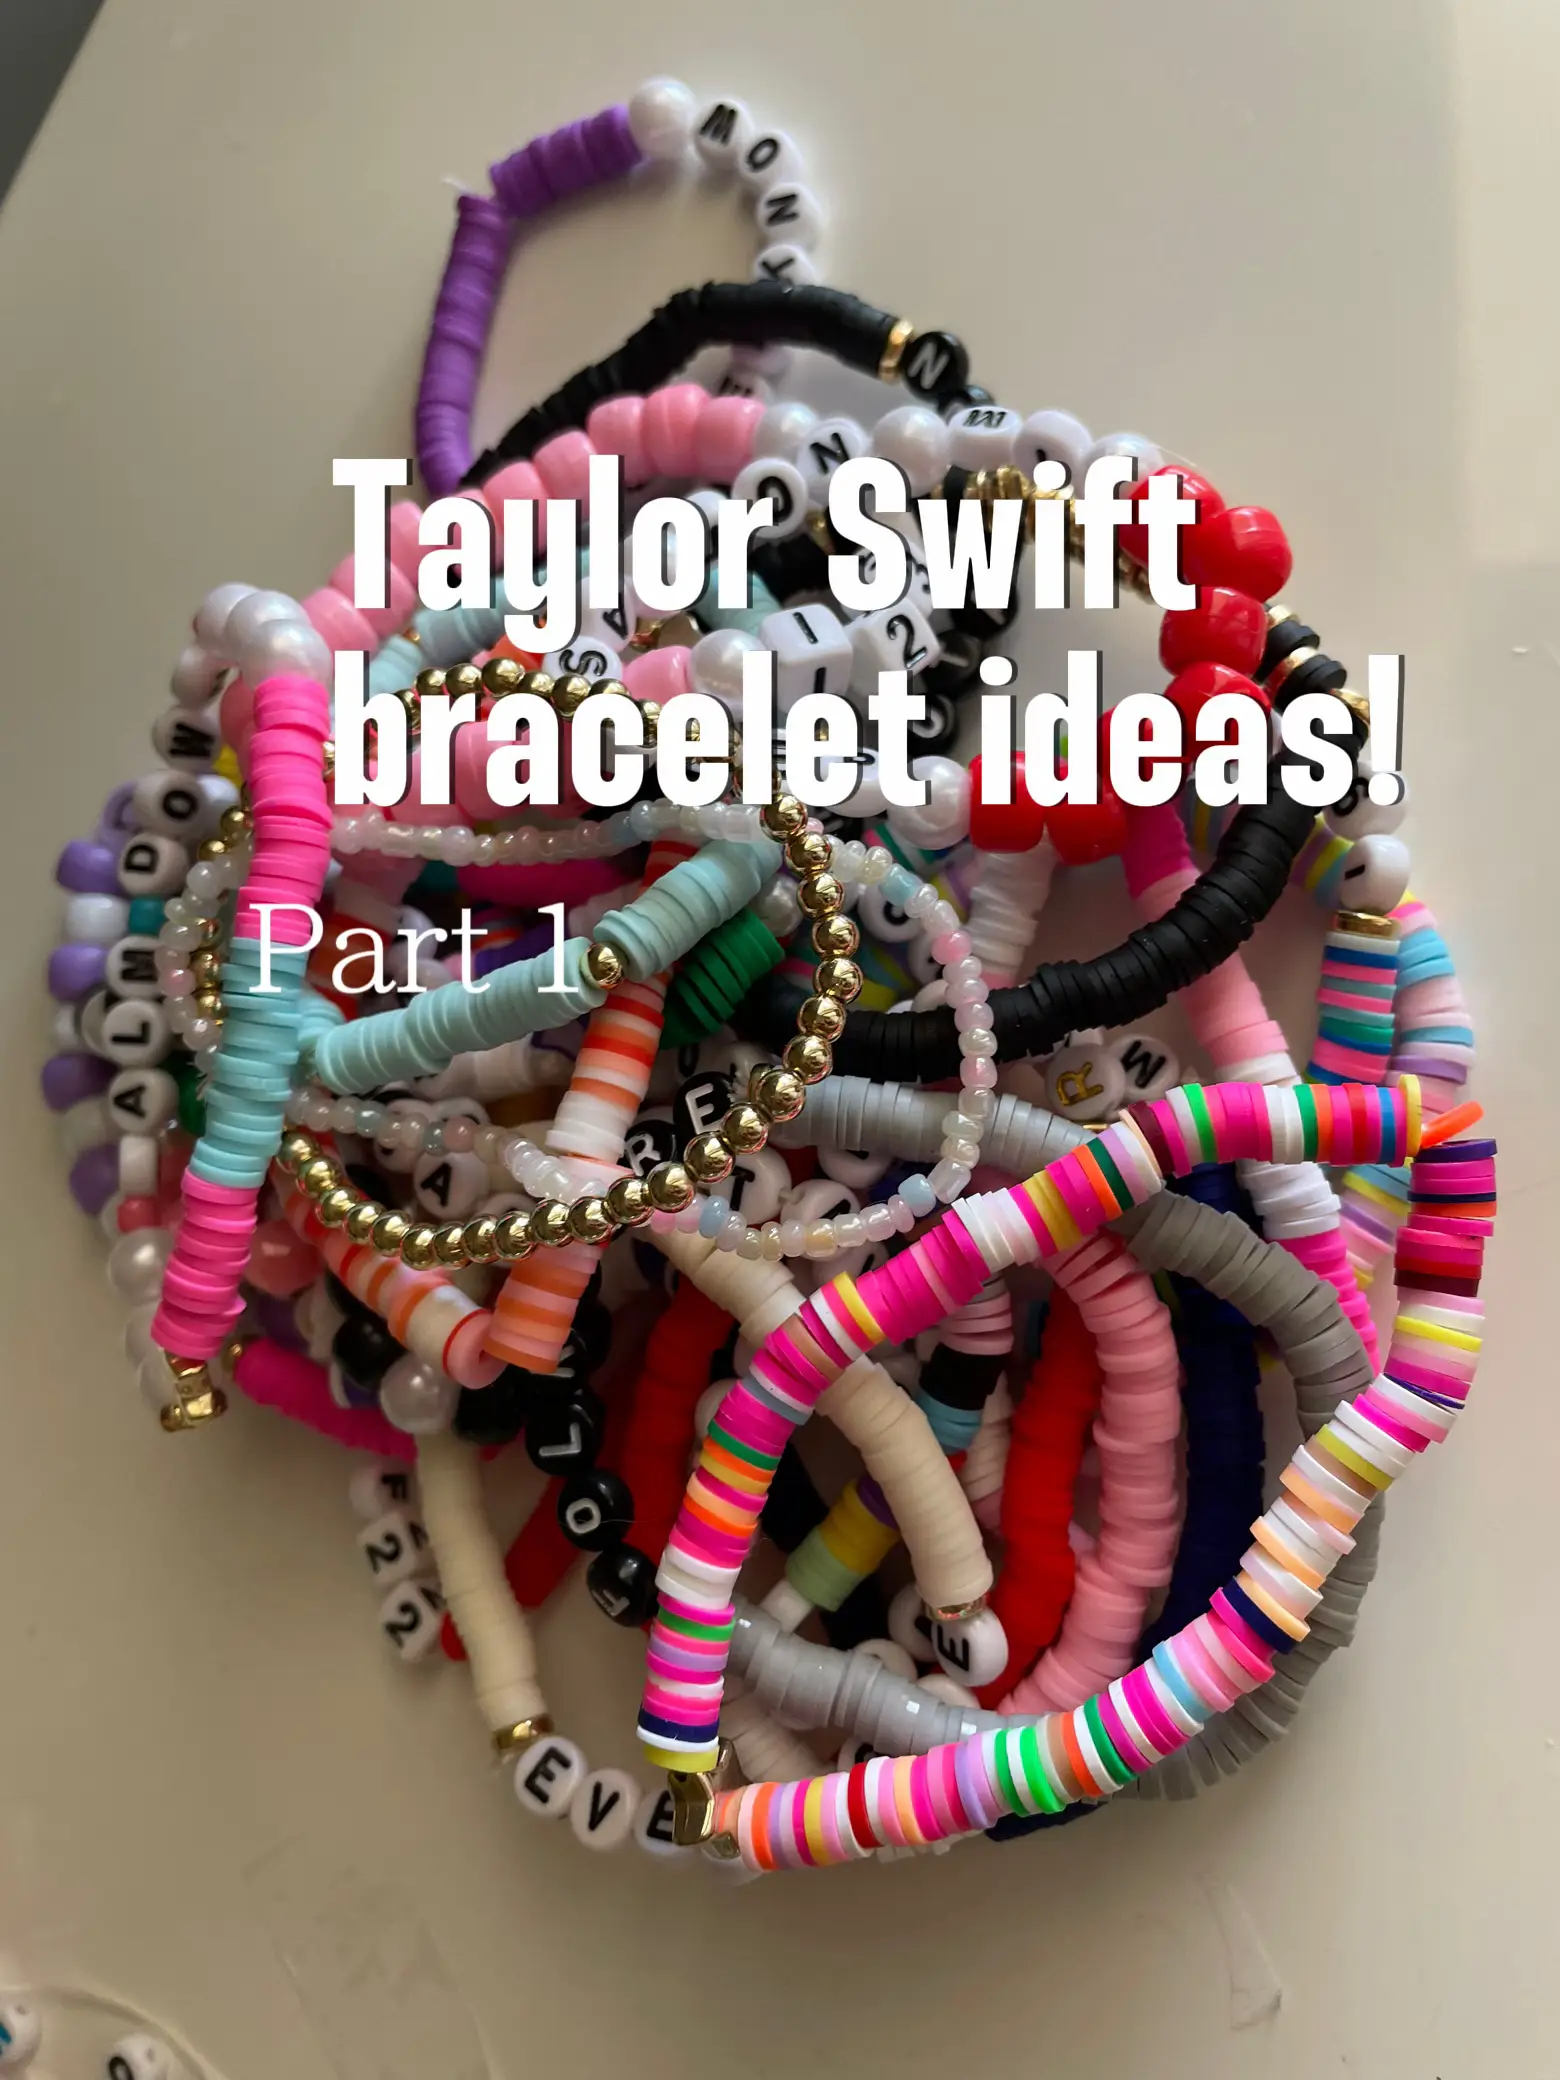 Taylor Swift bracelet ideas!, Gallery posted by Izzy1989